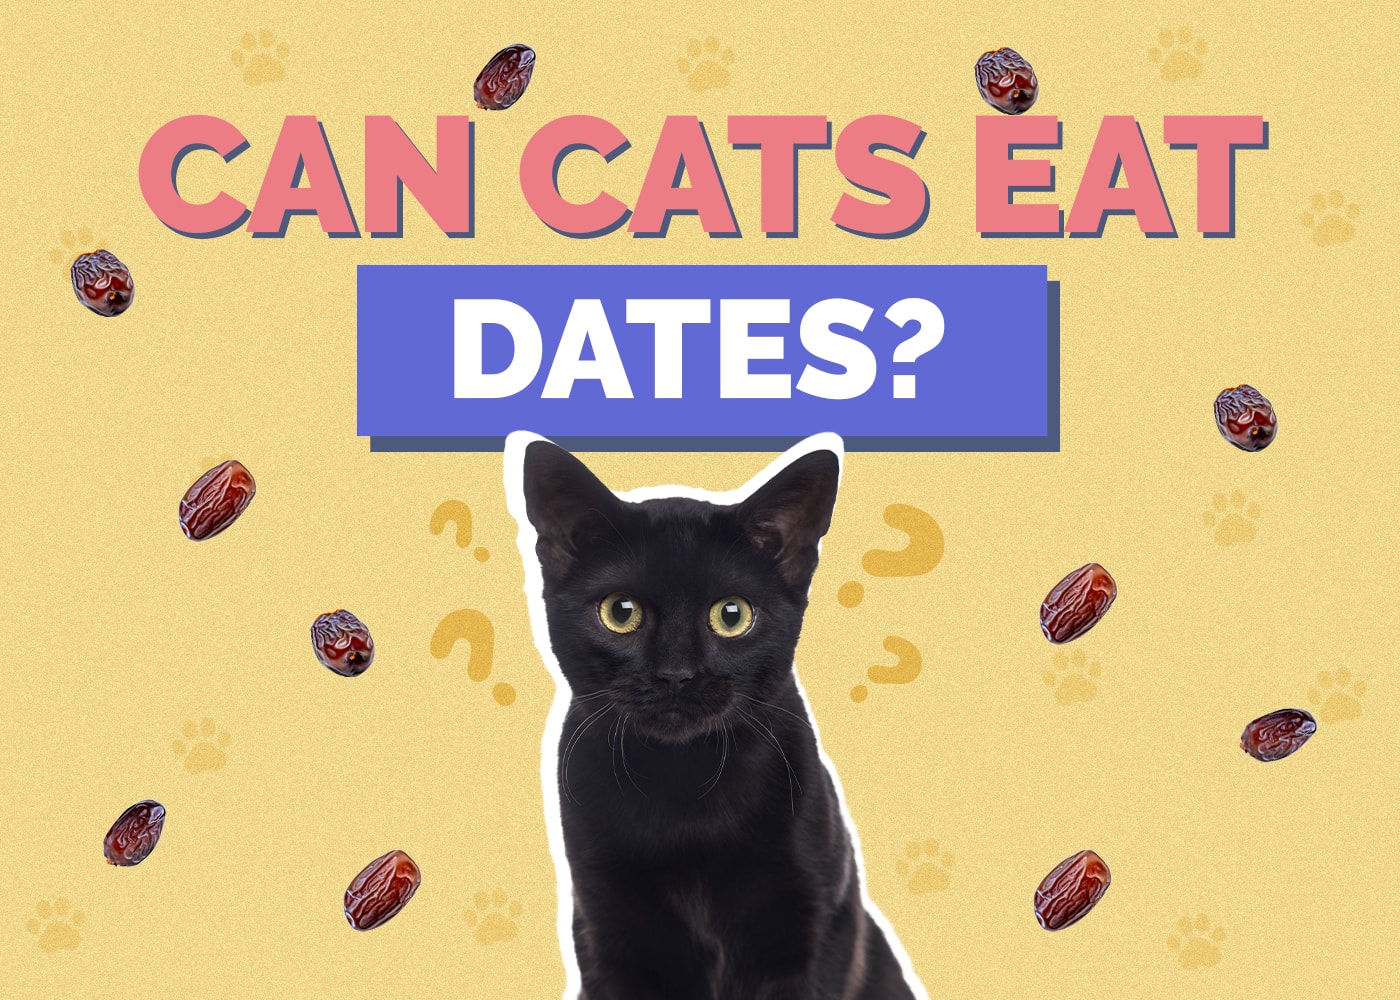 Can Cats Eat dates